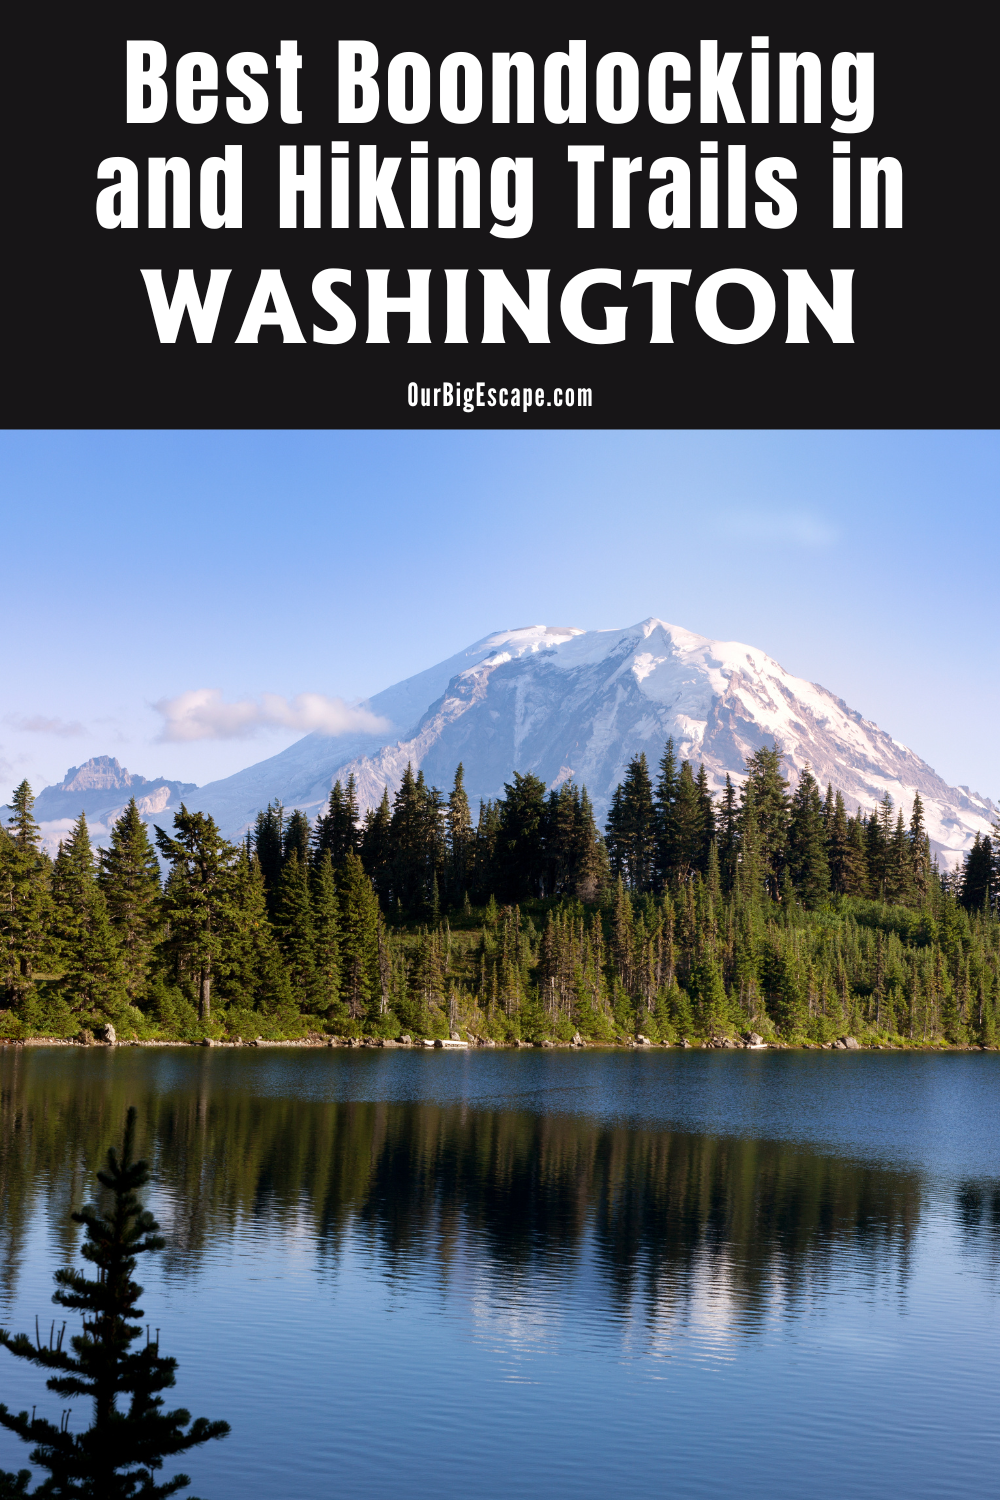 Best Boondocking and Hiking Trails in Washington